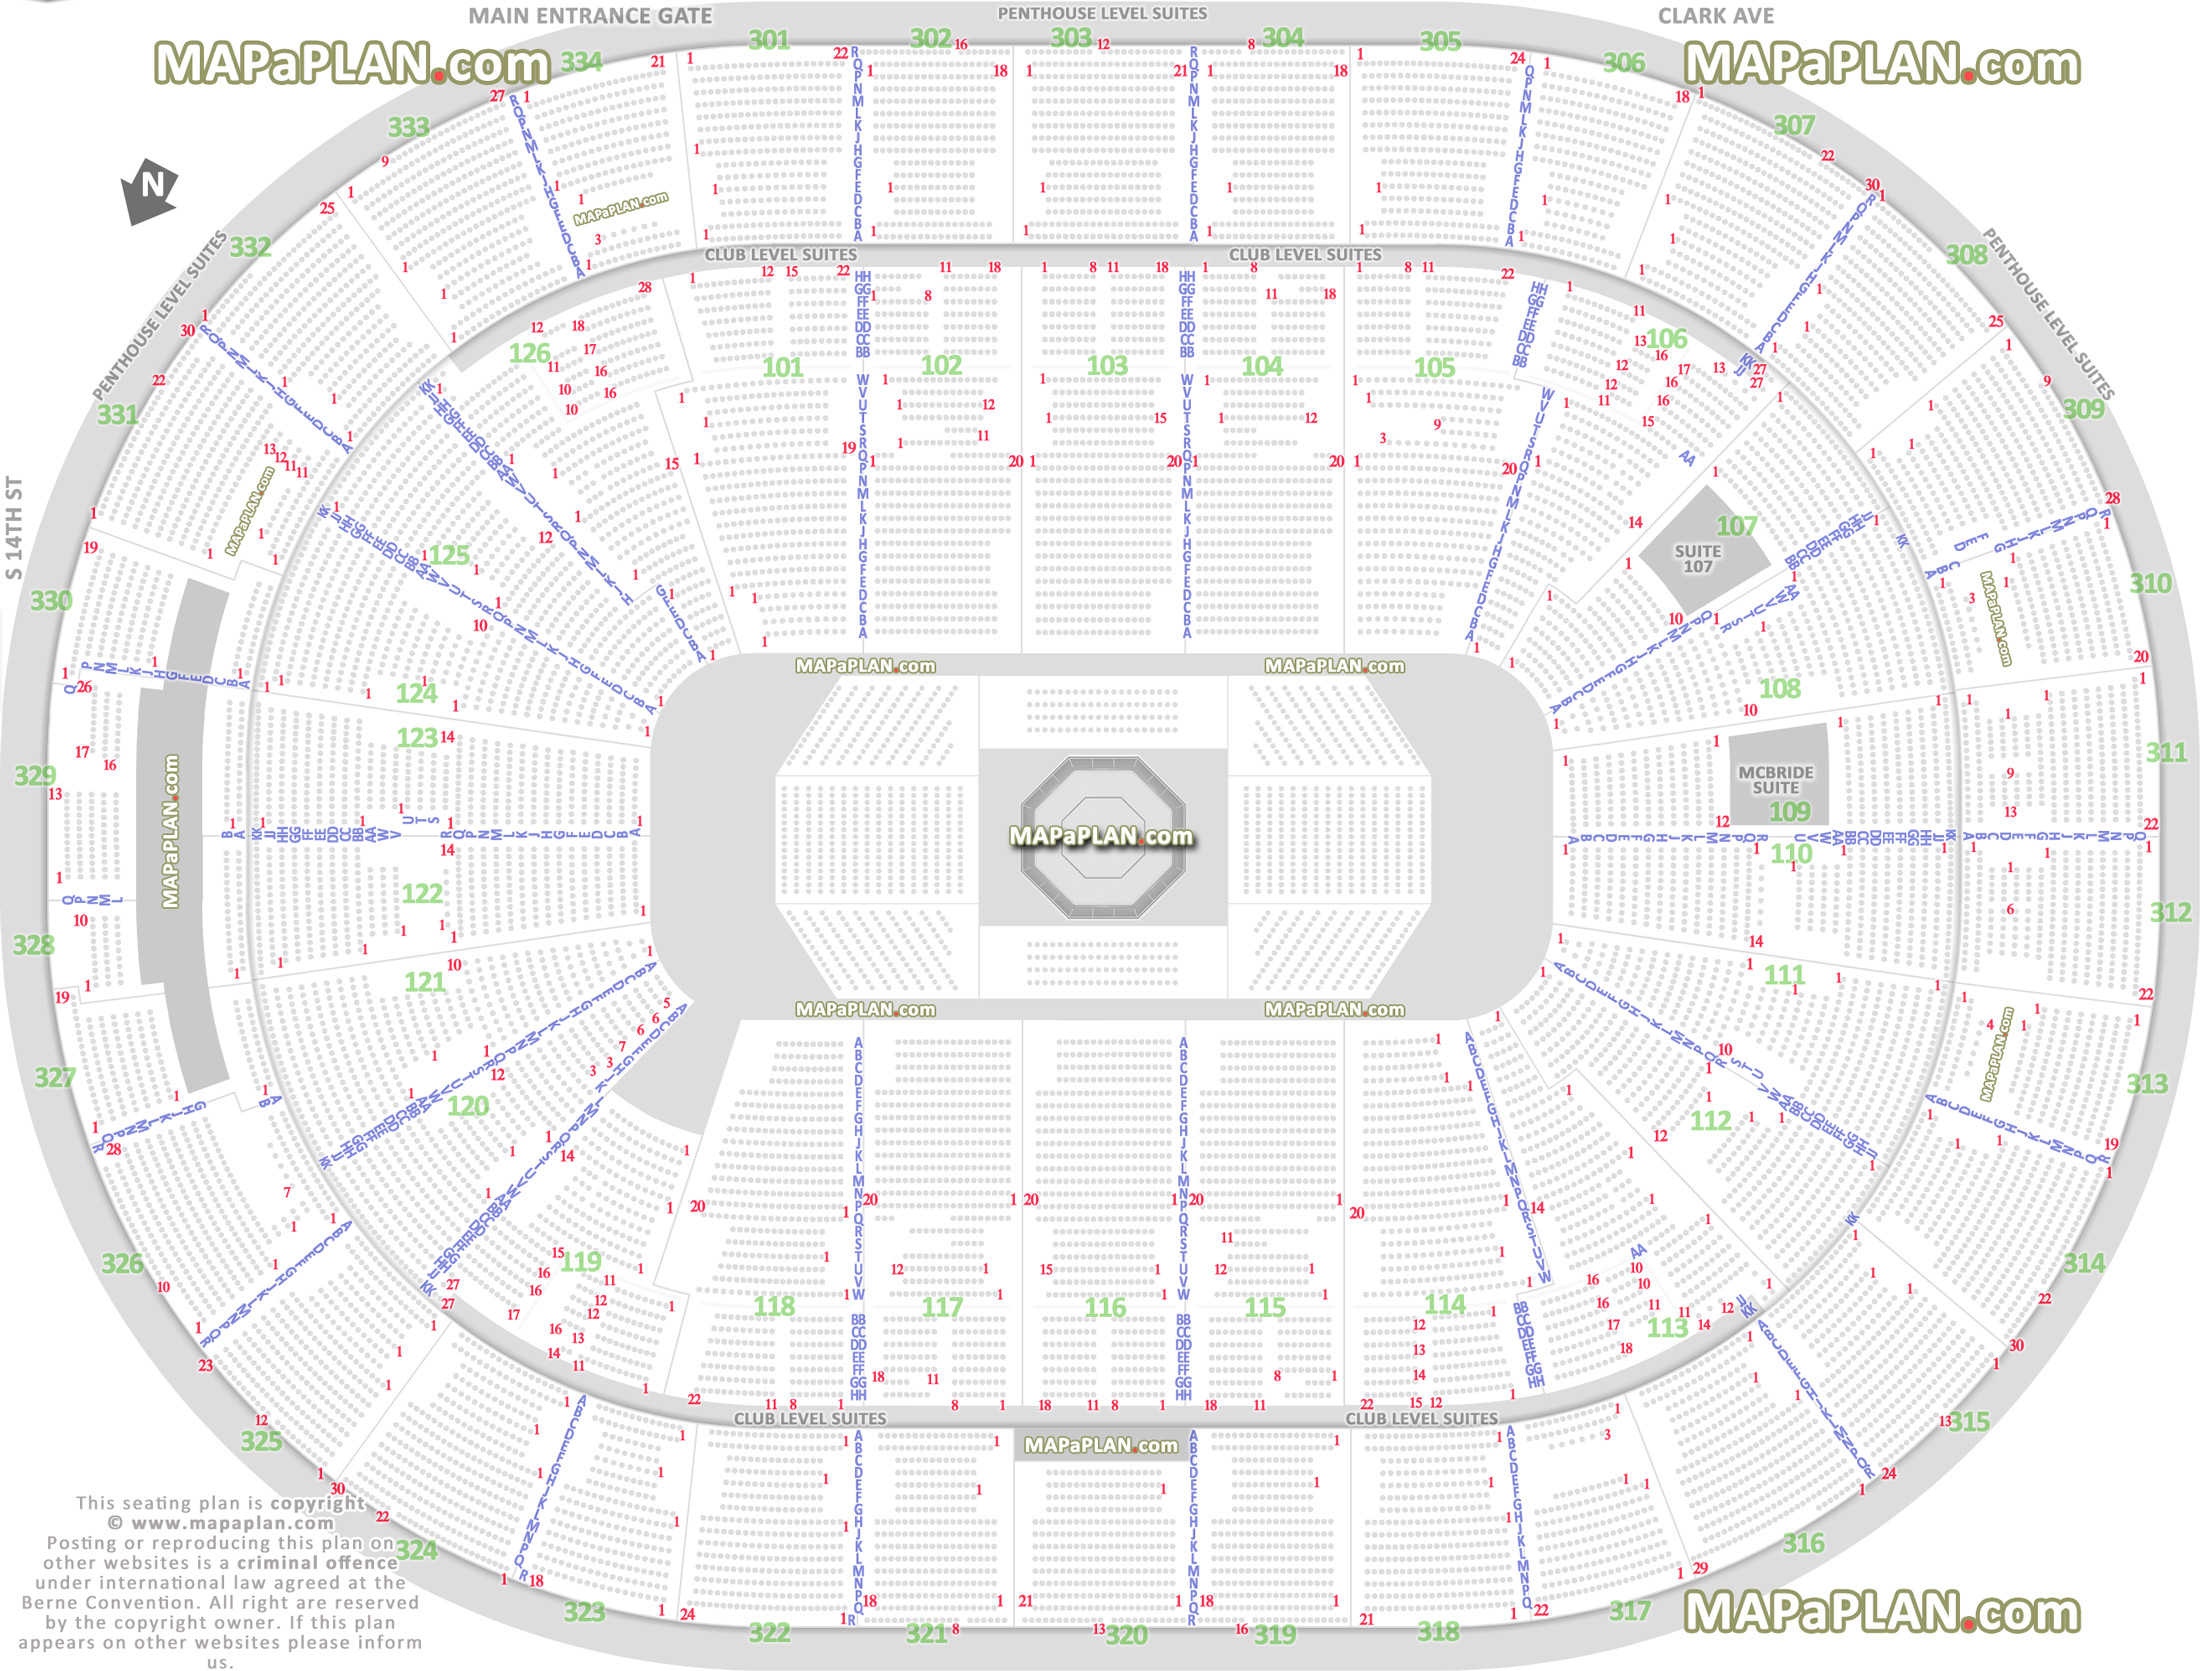 ufc mma fights fully seated setup chart viewer standing room only sro area main entrance gate exit detailed map wheelchair disabled handicap accessible seats St. Louis Enterprise Center seating chart